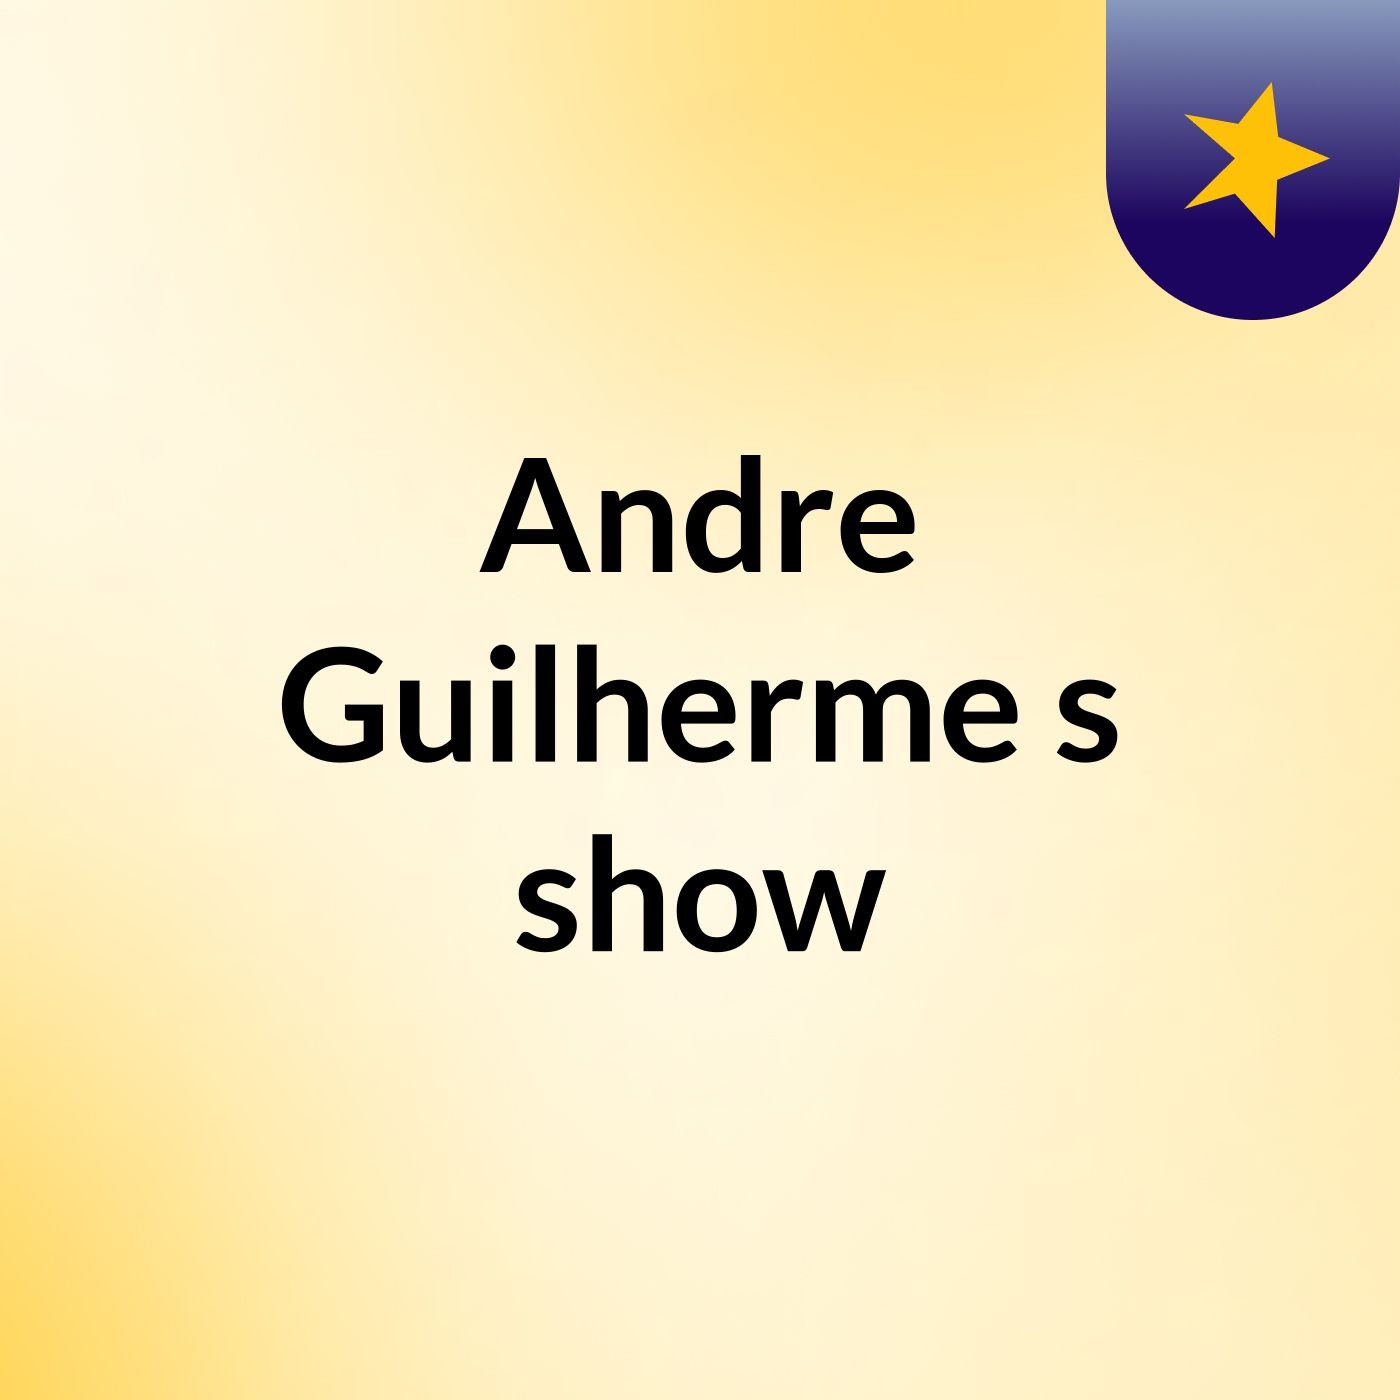 Andre Guilherme's show